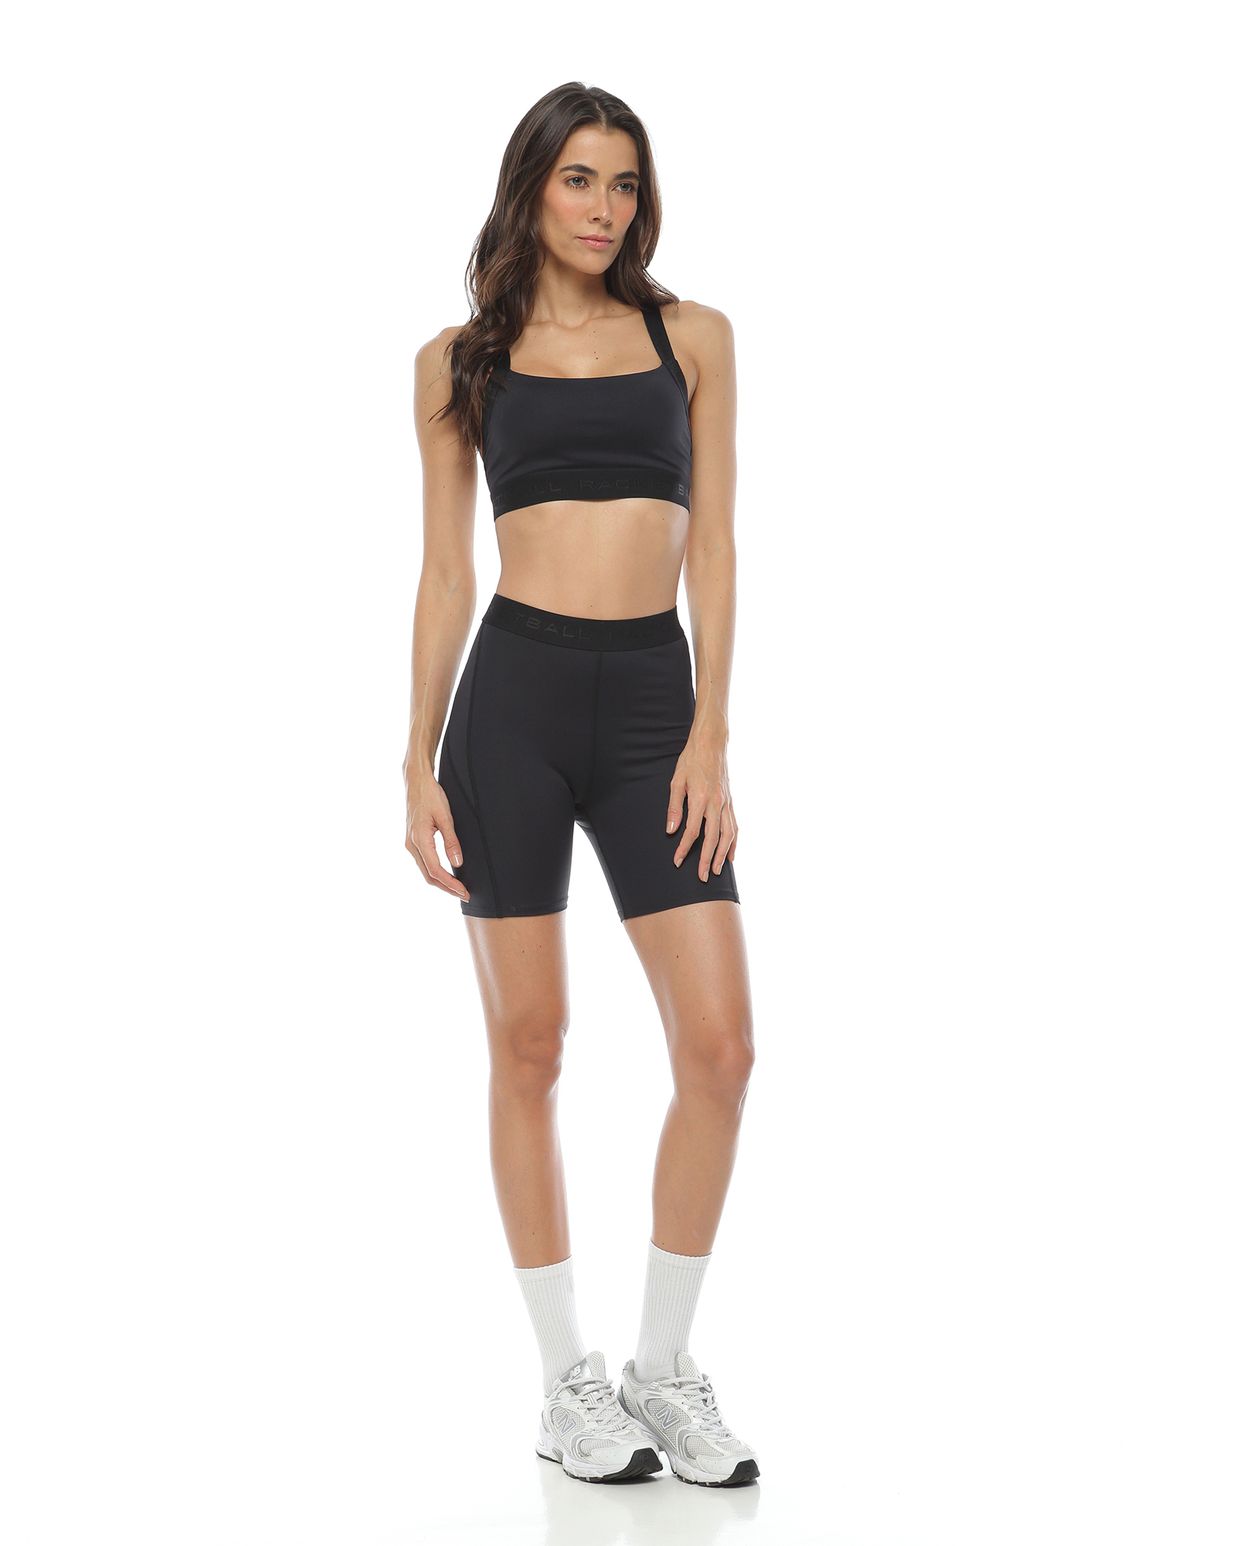 licra deportiva para mujer, color taupe - racketball movil